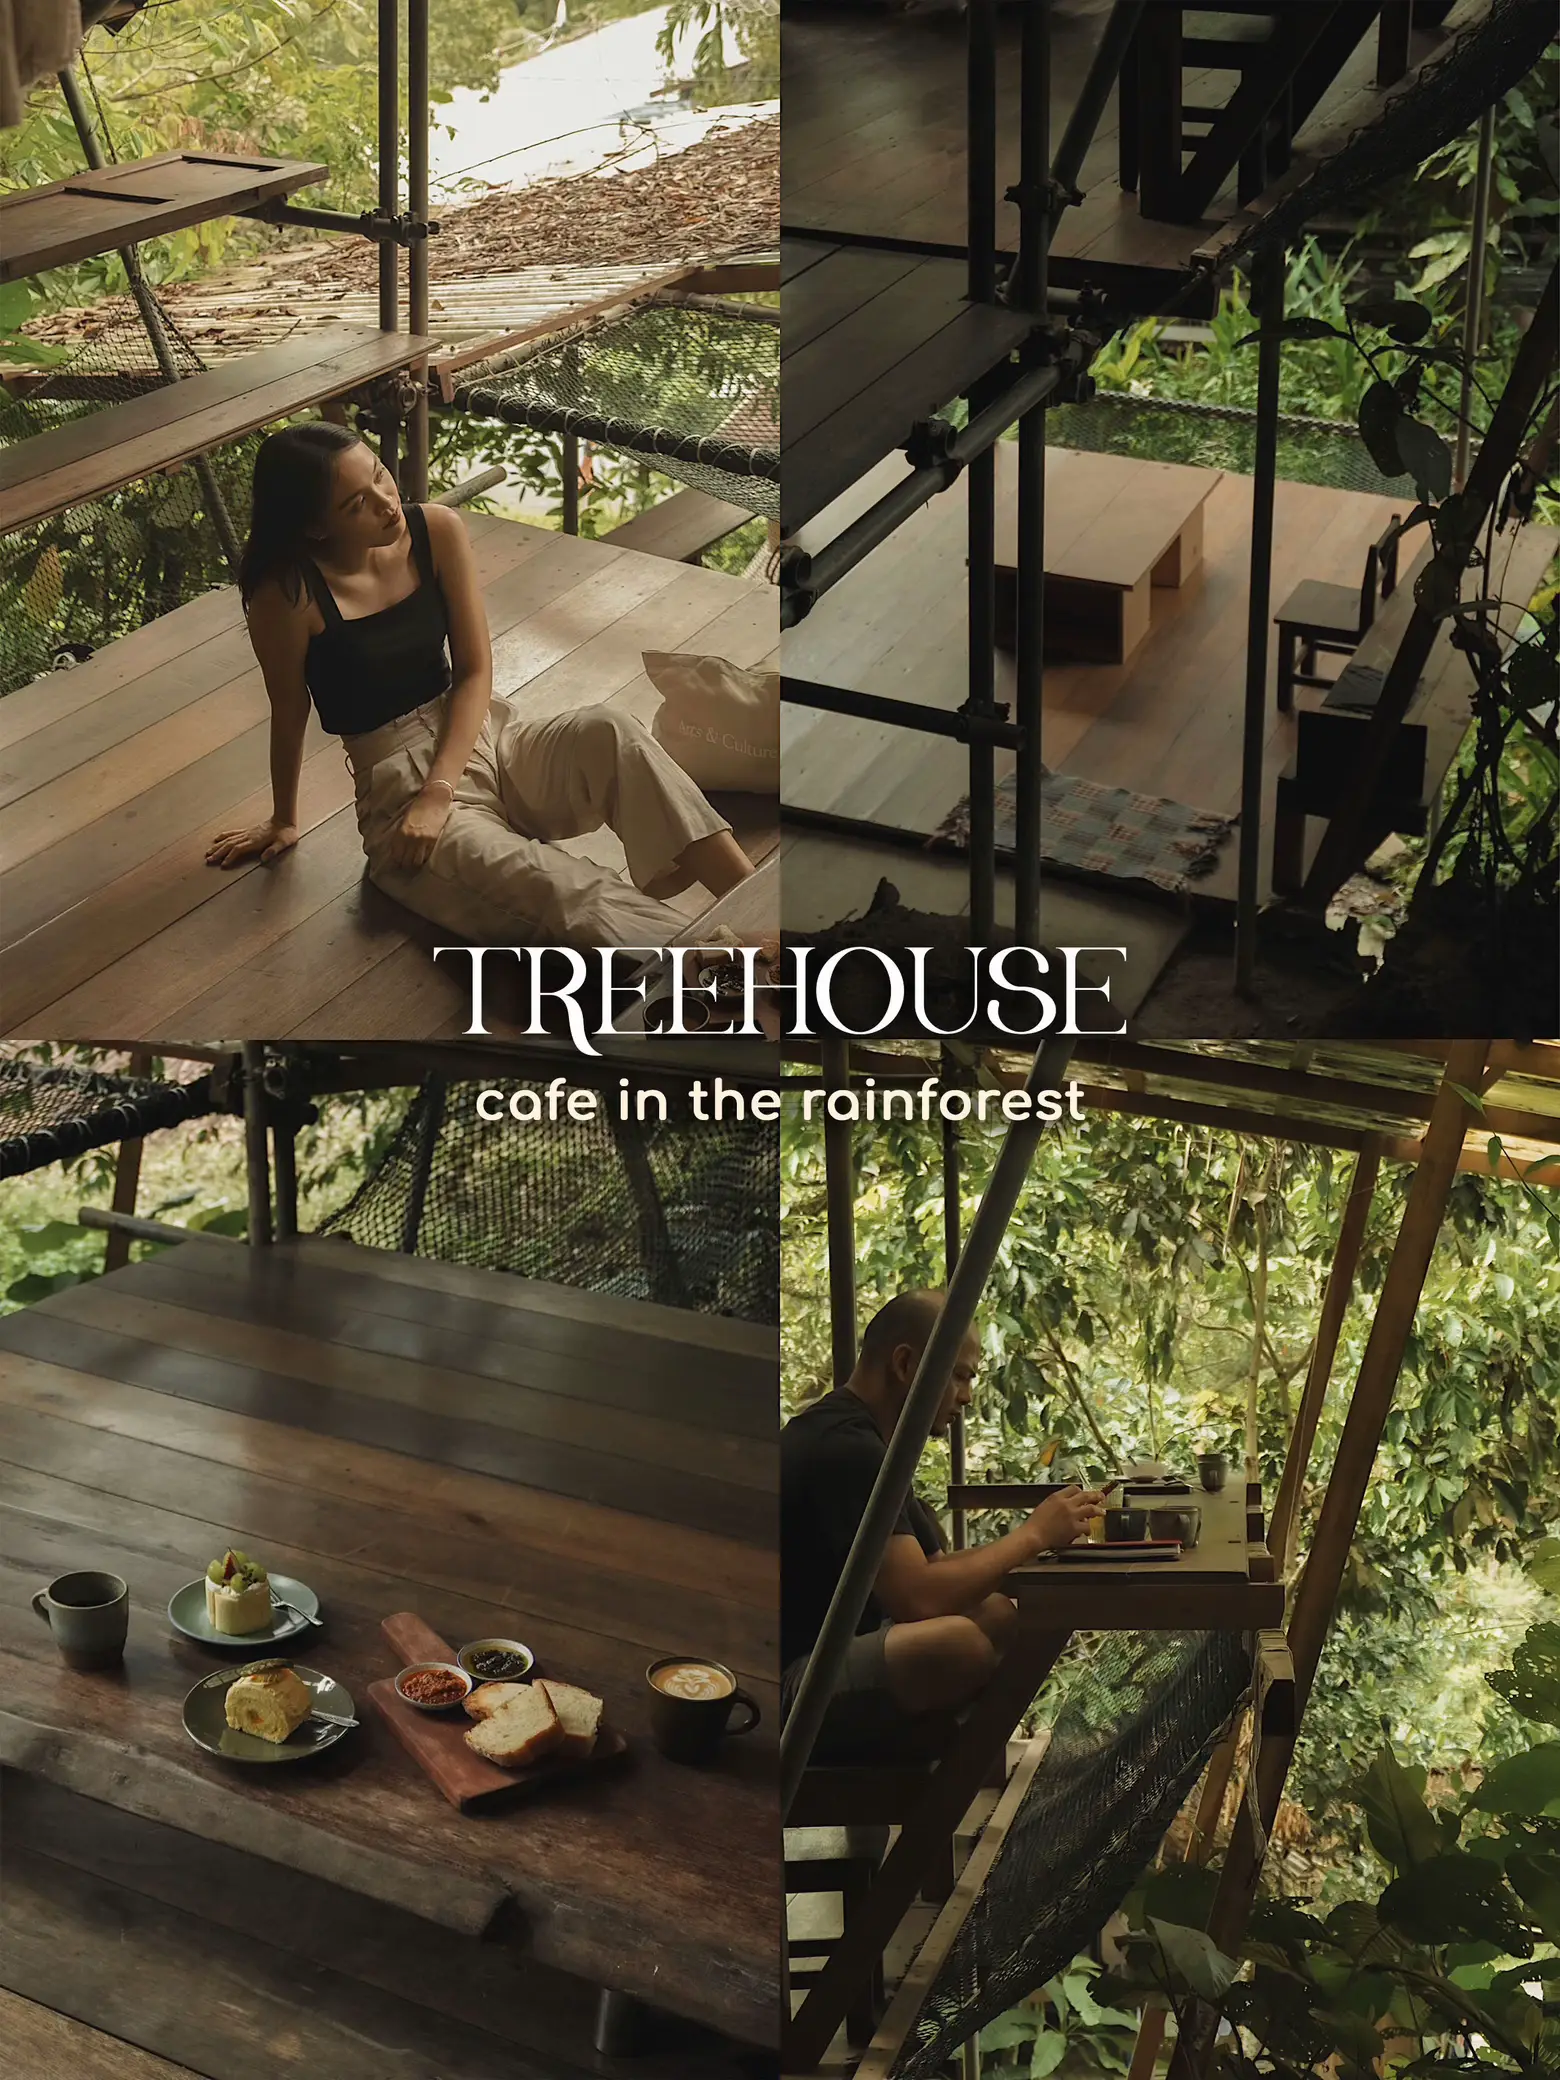 50mins from SG, a Treehouse Cafe in the Rainforest's images(0)